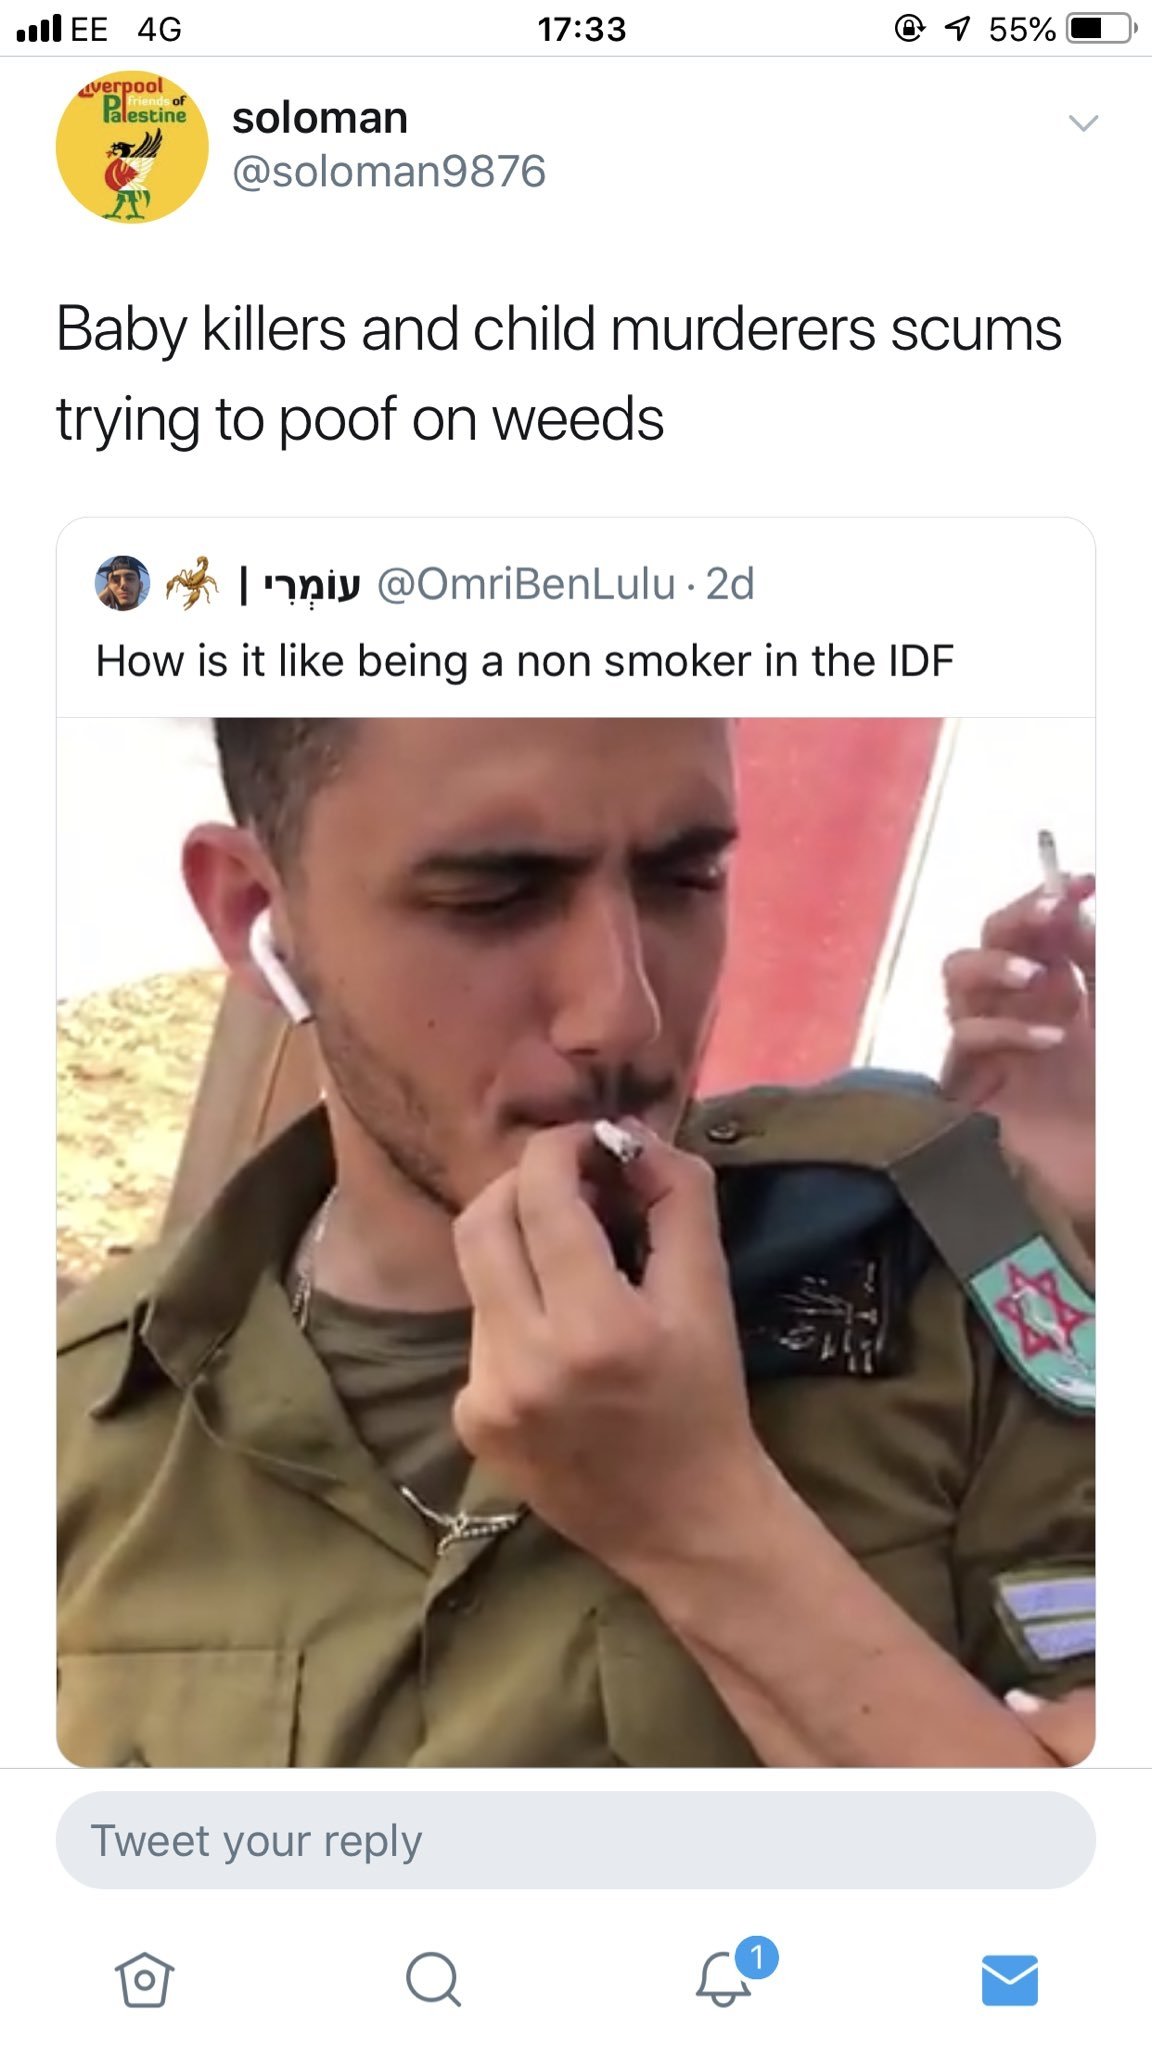 This screengrab from Twitter shows the conversation in which deceased IDF personnel Omer Tabib claims to have raped a Palestinian woman.